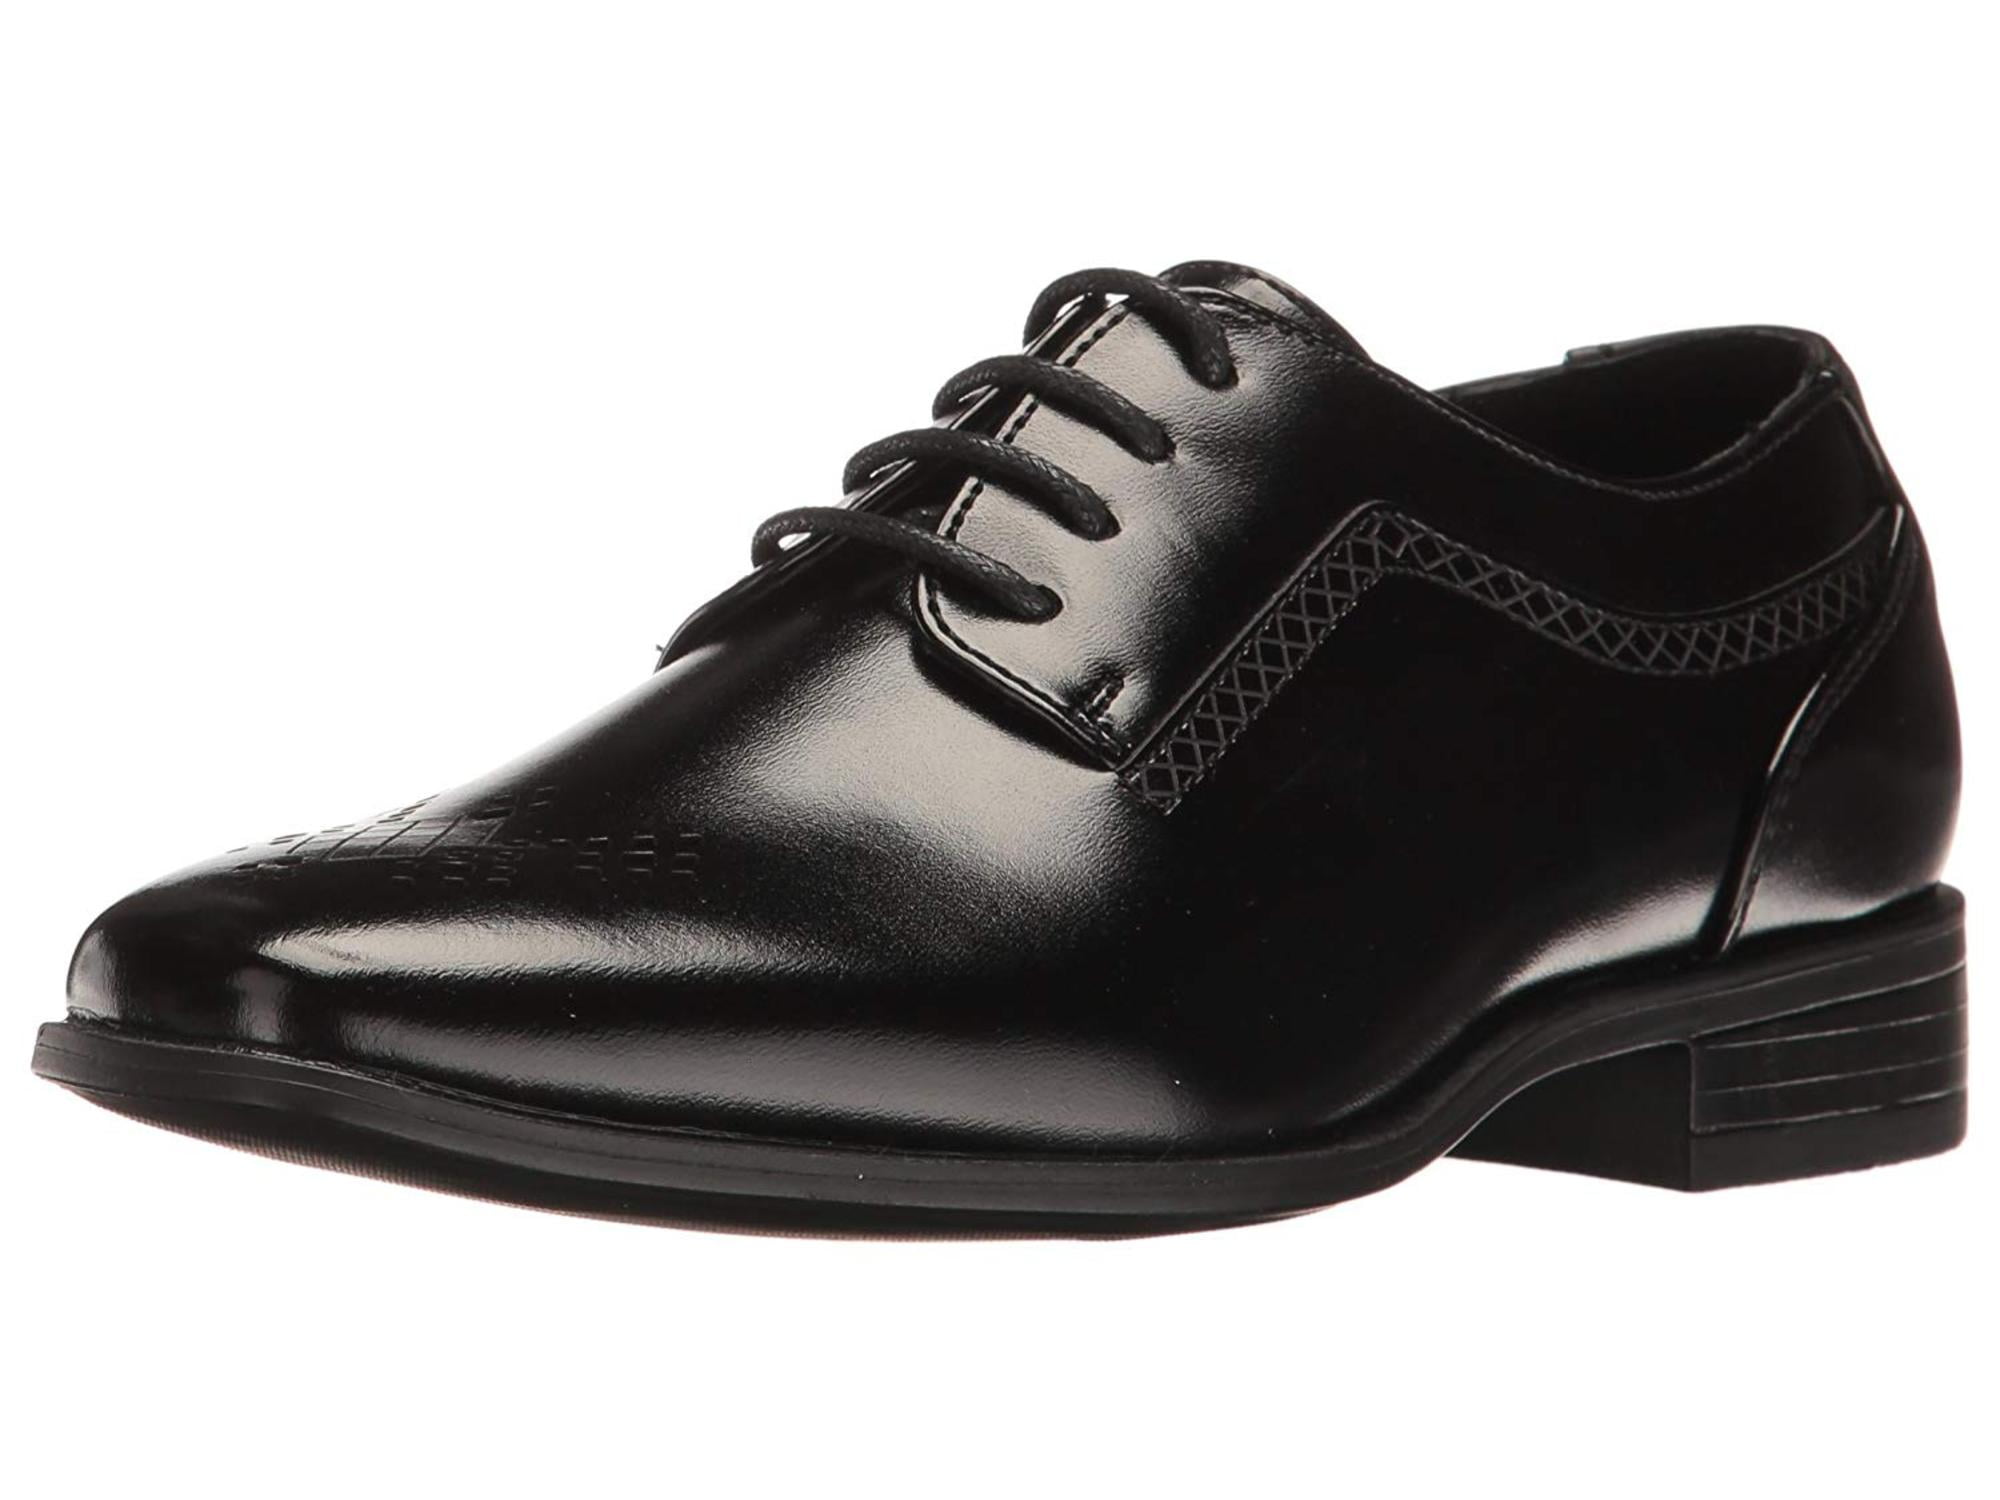 Stacy Adams Boys Somerton Dress  Shoes  Youth  Sizes 13 